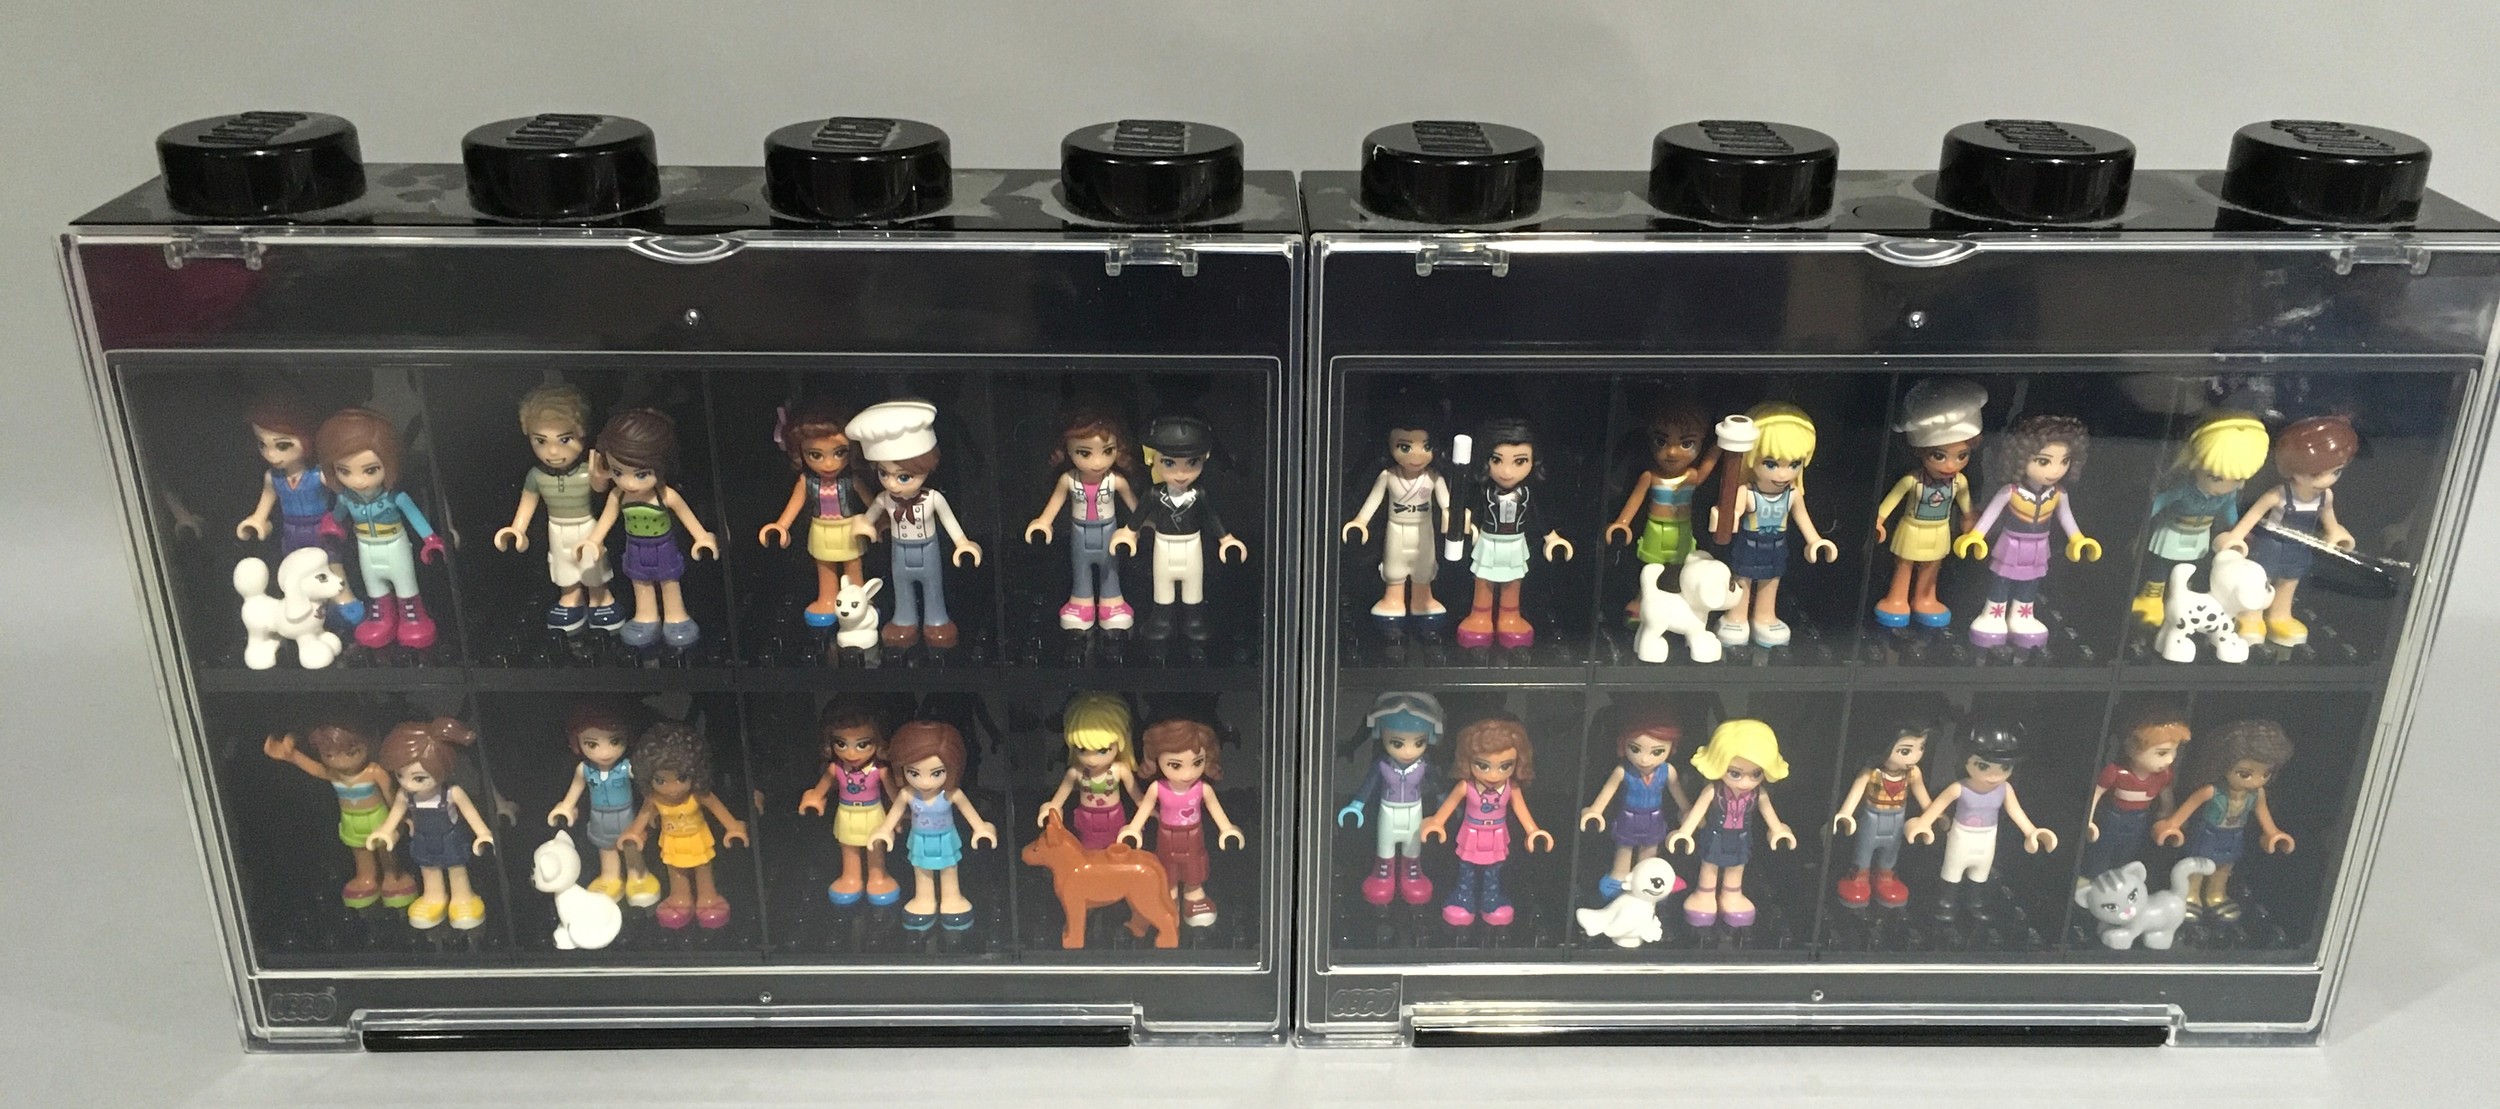 32 Lego Friends Minifigures with some animals and accessories in display cases.